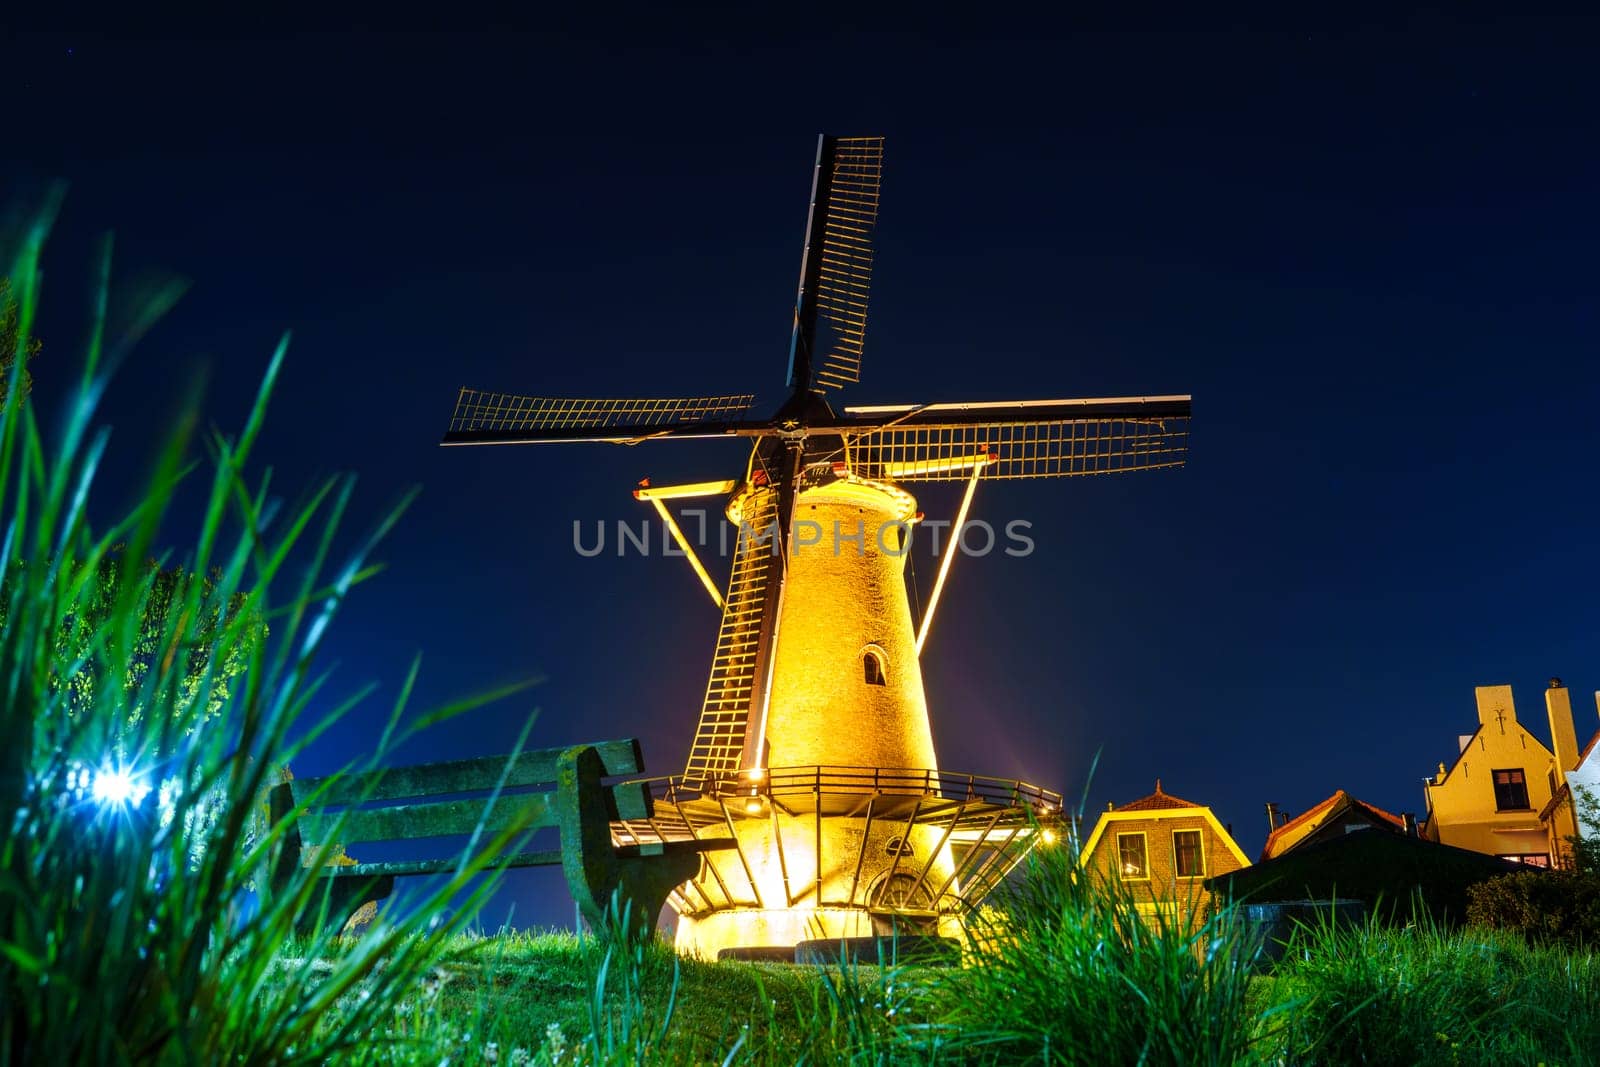 Beautiful old windmill standing tall and illuminated by colorful lights during the night in Zierikzee, a historic town in the Netherlands, creating a stunning and picturesque scene.